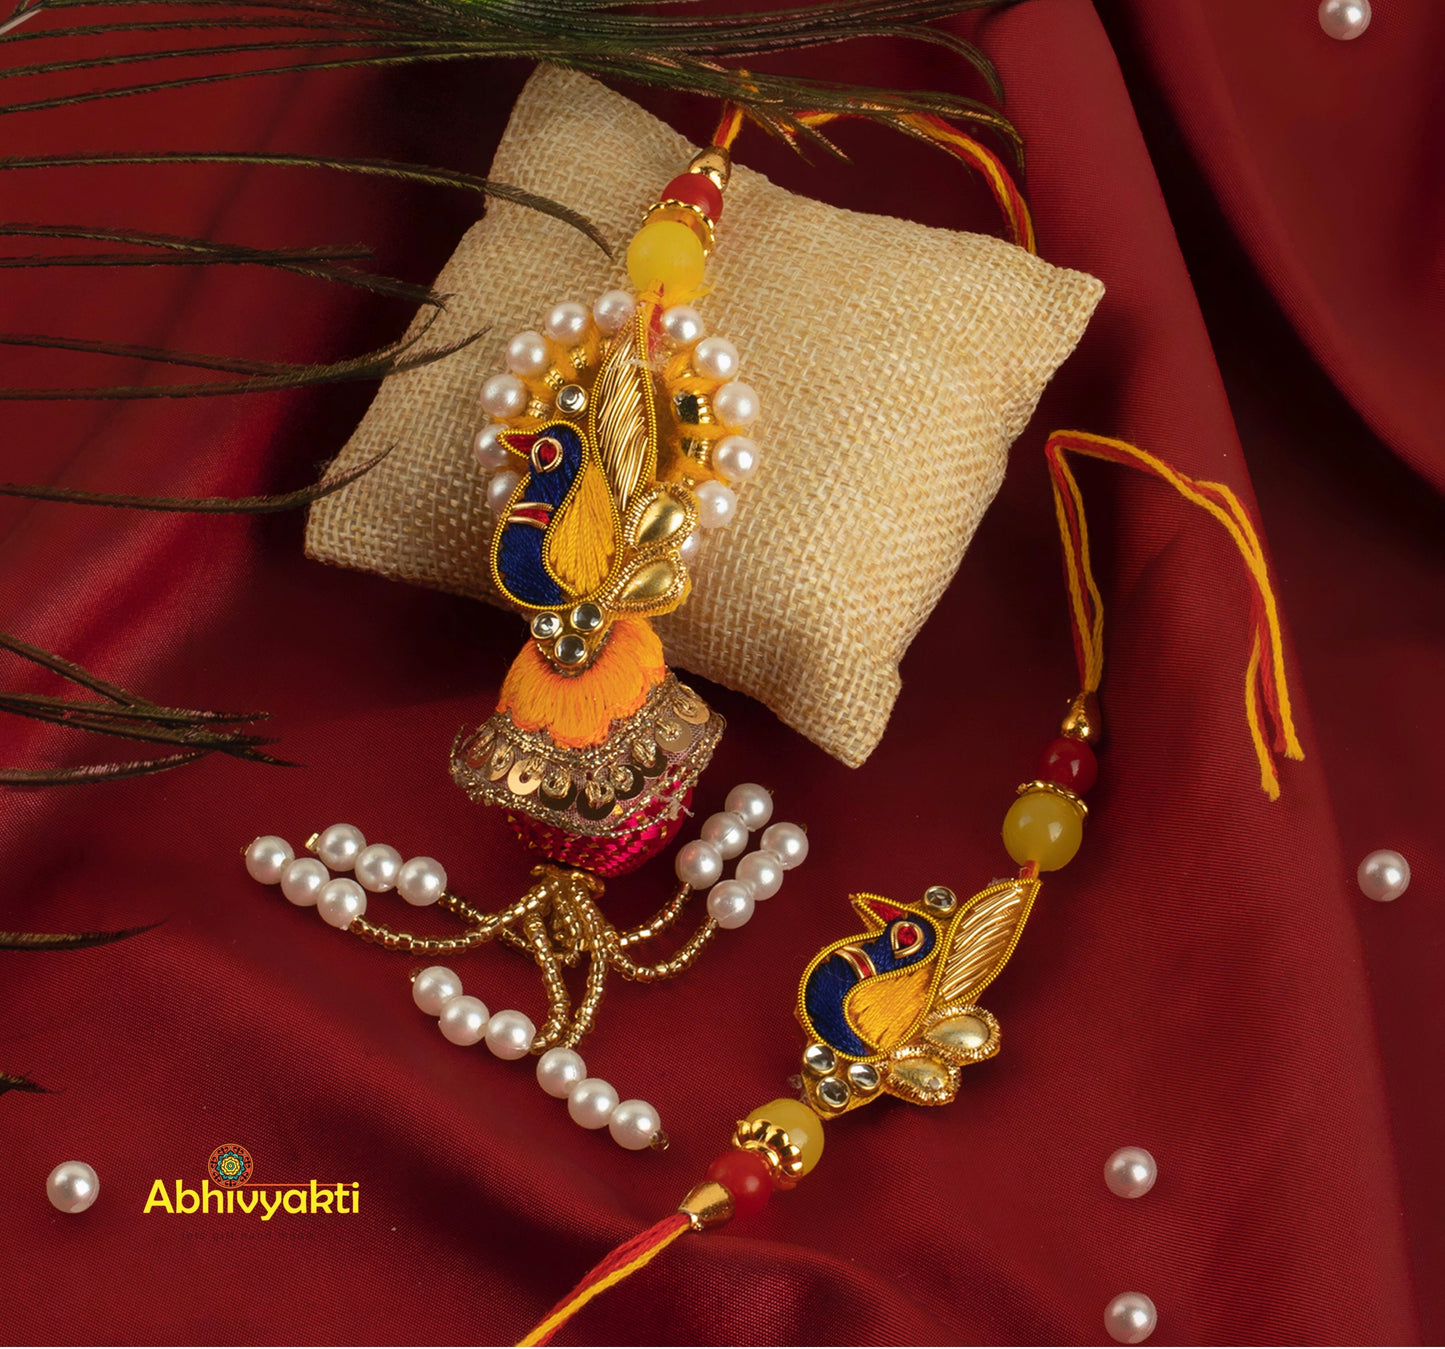 Two elegant rakhi bracelets with pearls and beads, featuring a rakhi lumba design and adorned with beautiful stones and beads